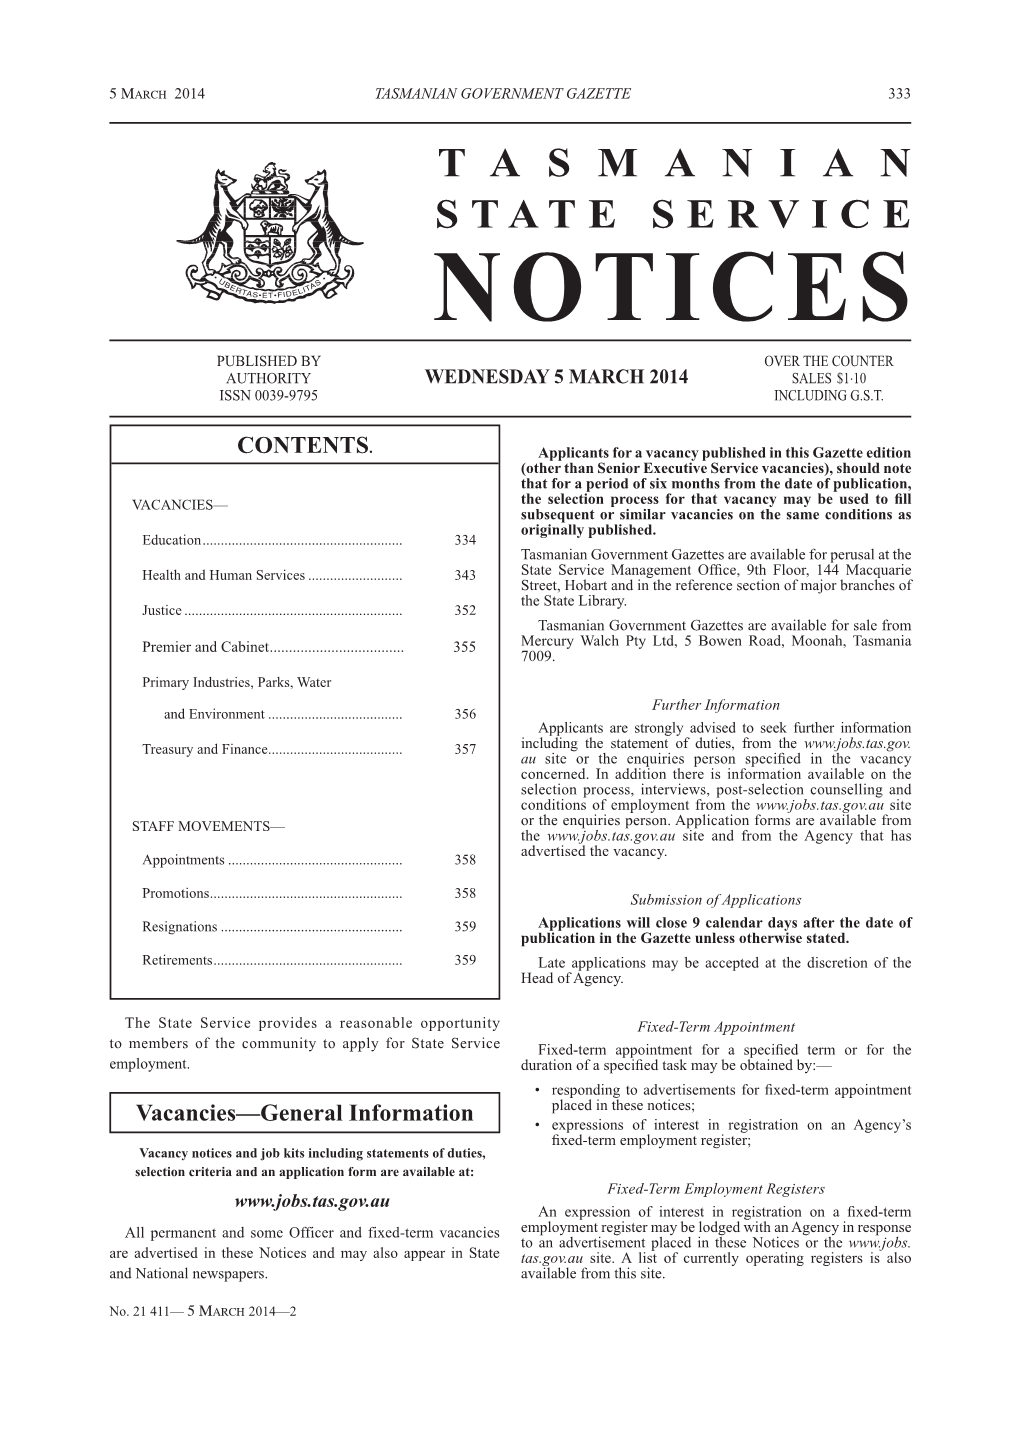 State Service Notices 21411